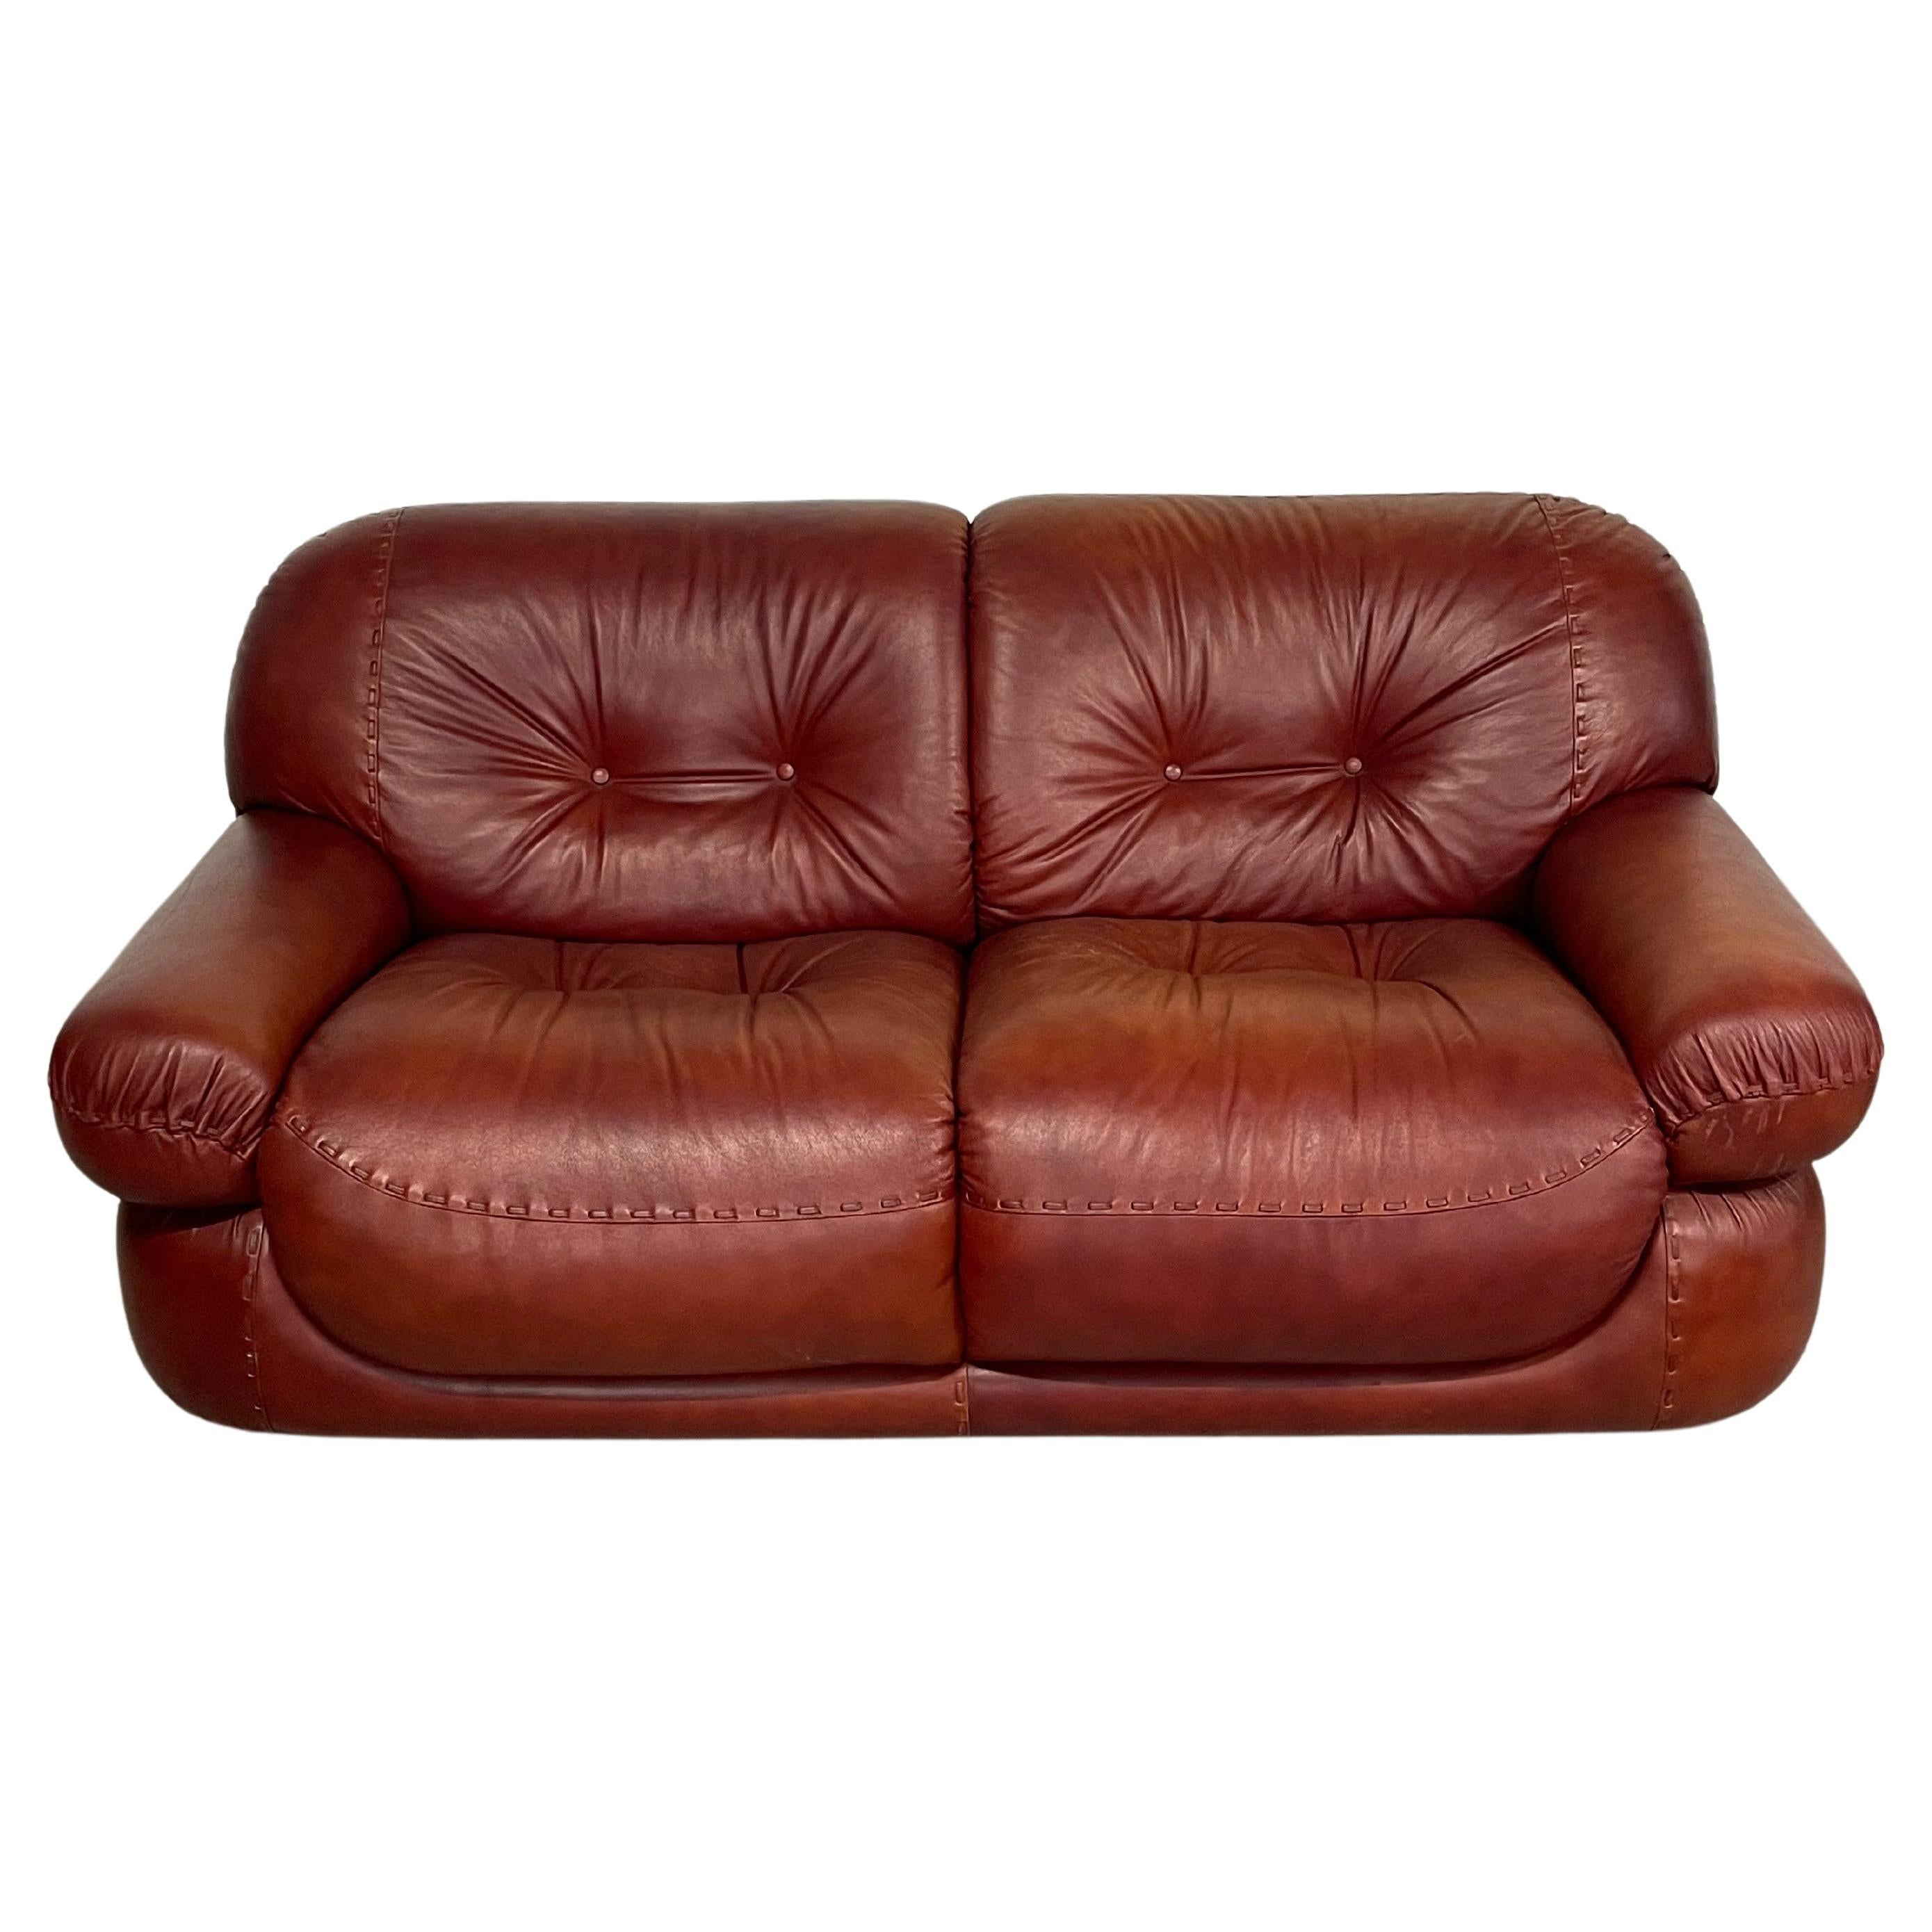 2-seater leather sofa mod. Sapporo by Mobil Girgi Italia, 1970s For Sale